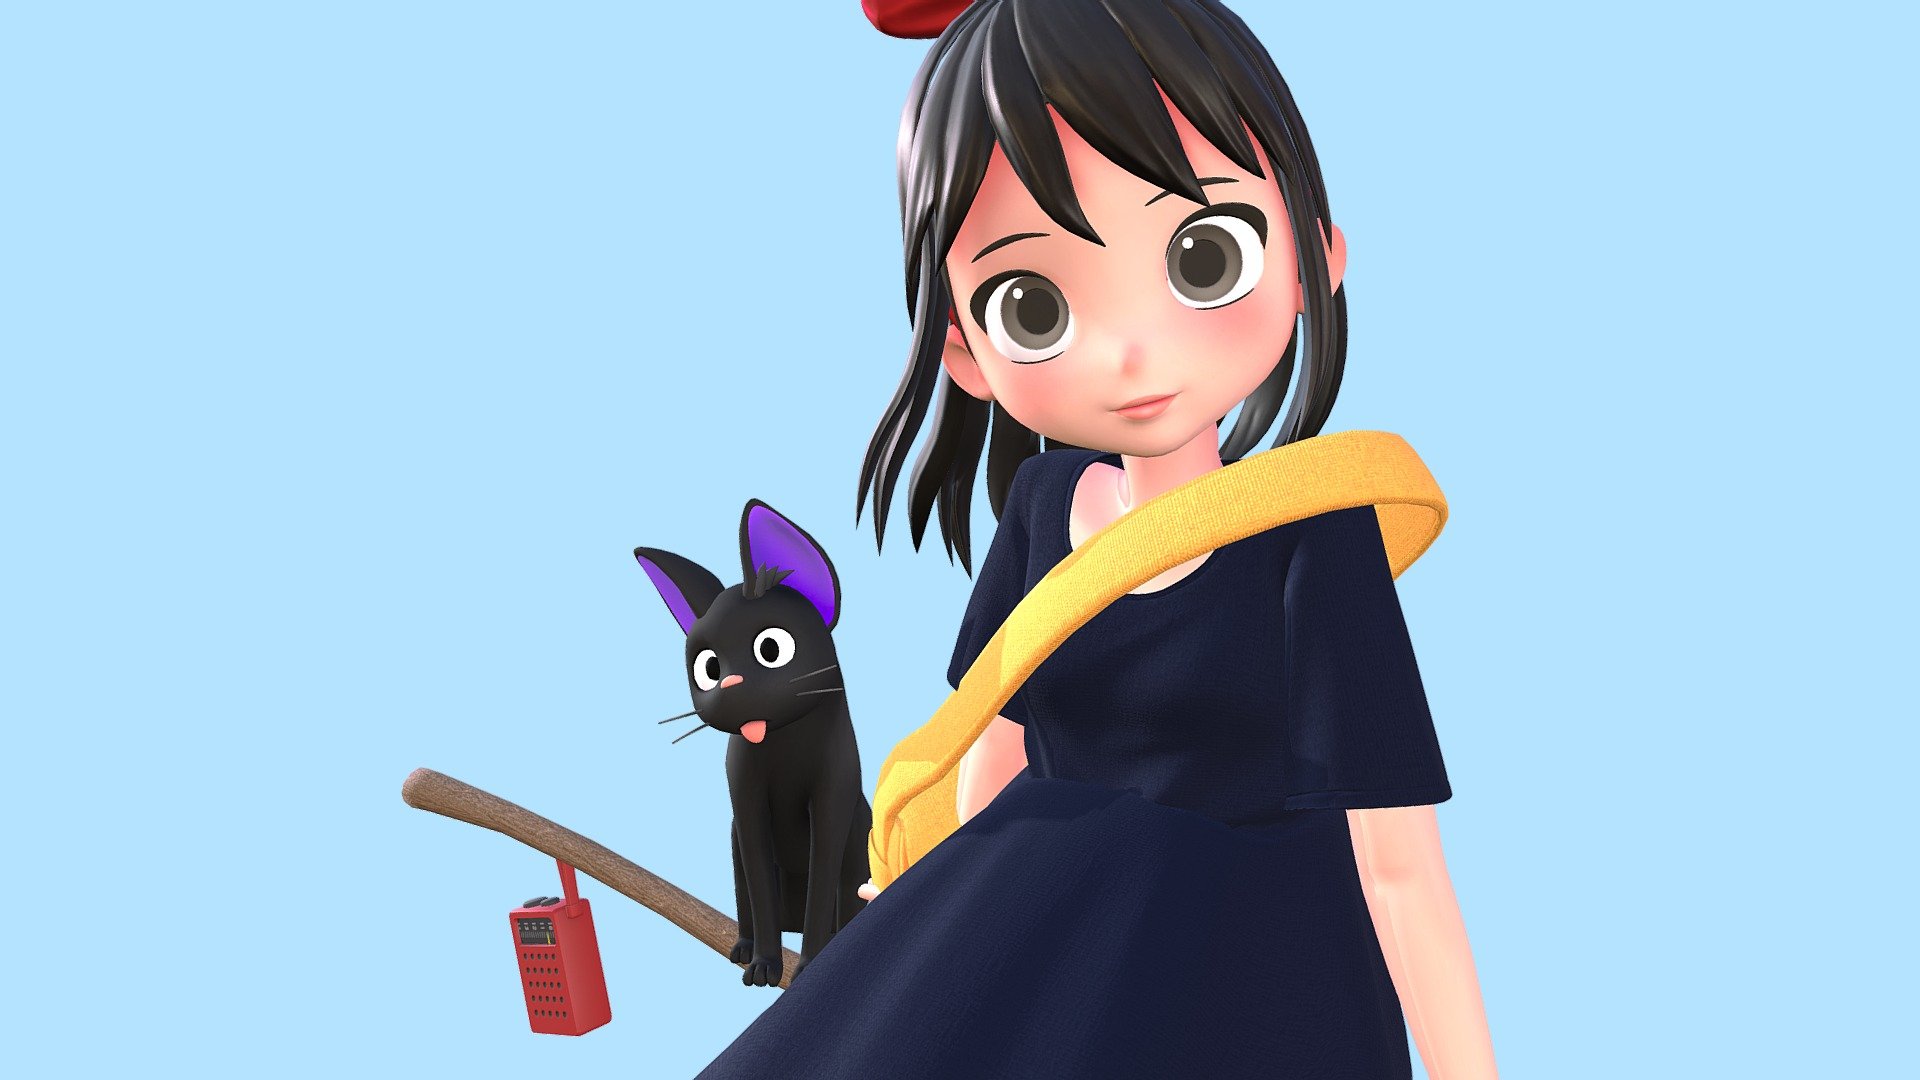 This is Kiki is an old model I made a few years ago. I recently updated her by fixing the proportion of her body and face, adding some new textures, and giving her a full-action cat figure. Now she looks much cuter than before! I also added some expression animations, but unfortunately, I'm not sure how to properly upload them to Sketchfab.

這個琪琪是之前做的模型, 我試著做了一些更新,身體比例&hellip;增加貼圖&hellip;等等,另外附加了一隻吉吉
整體看起來比先前的版本要可愛一些
我還做了一些表情動畫,但很可惜我不知道要怎麼把它正確地上傳到sketchfab - kiki's delivery service - 3D model by hwahaha418 3d model